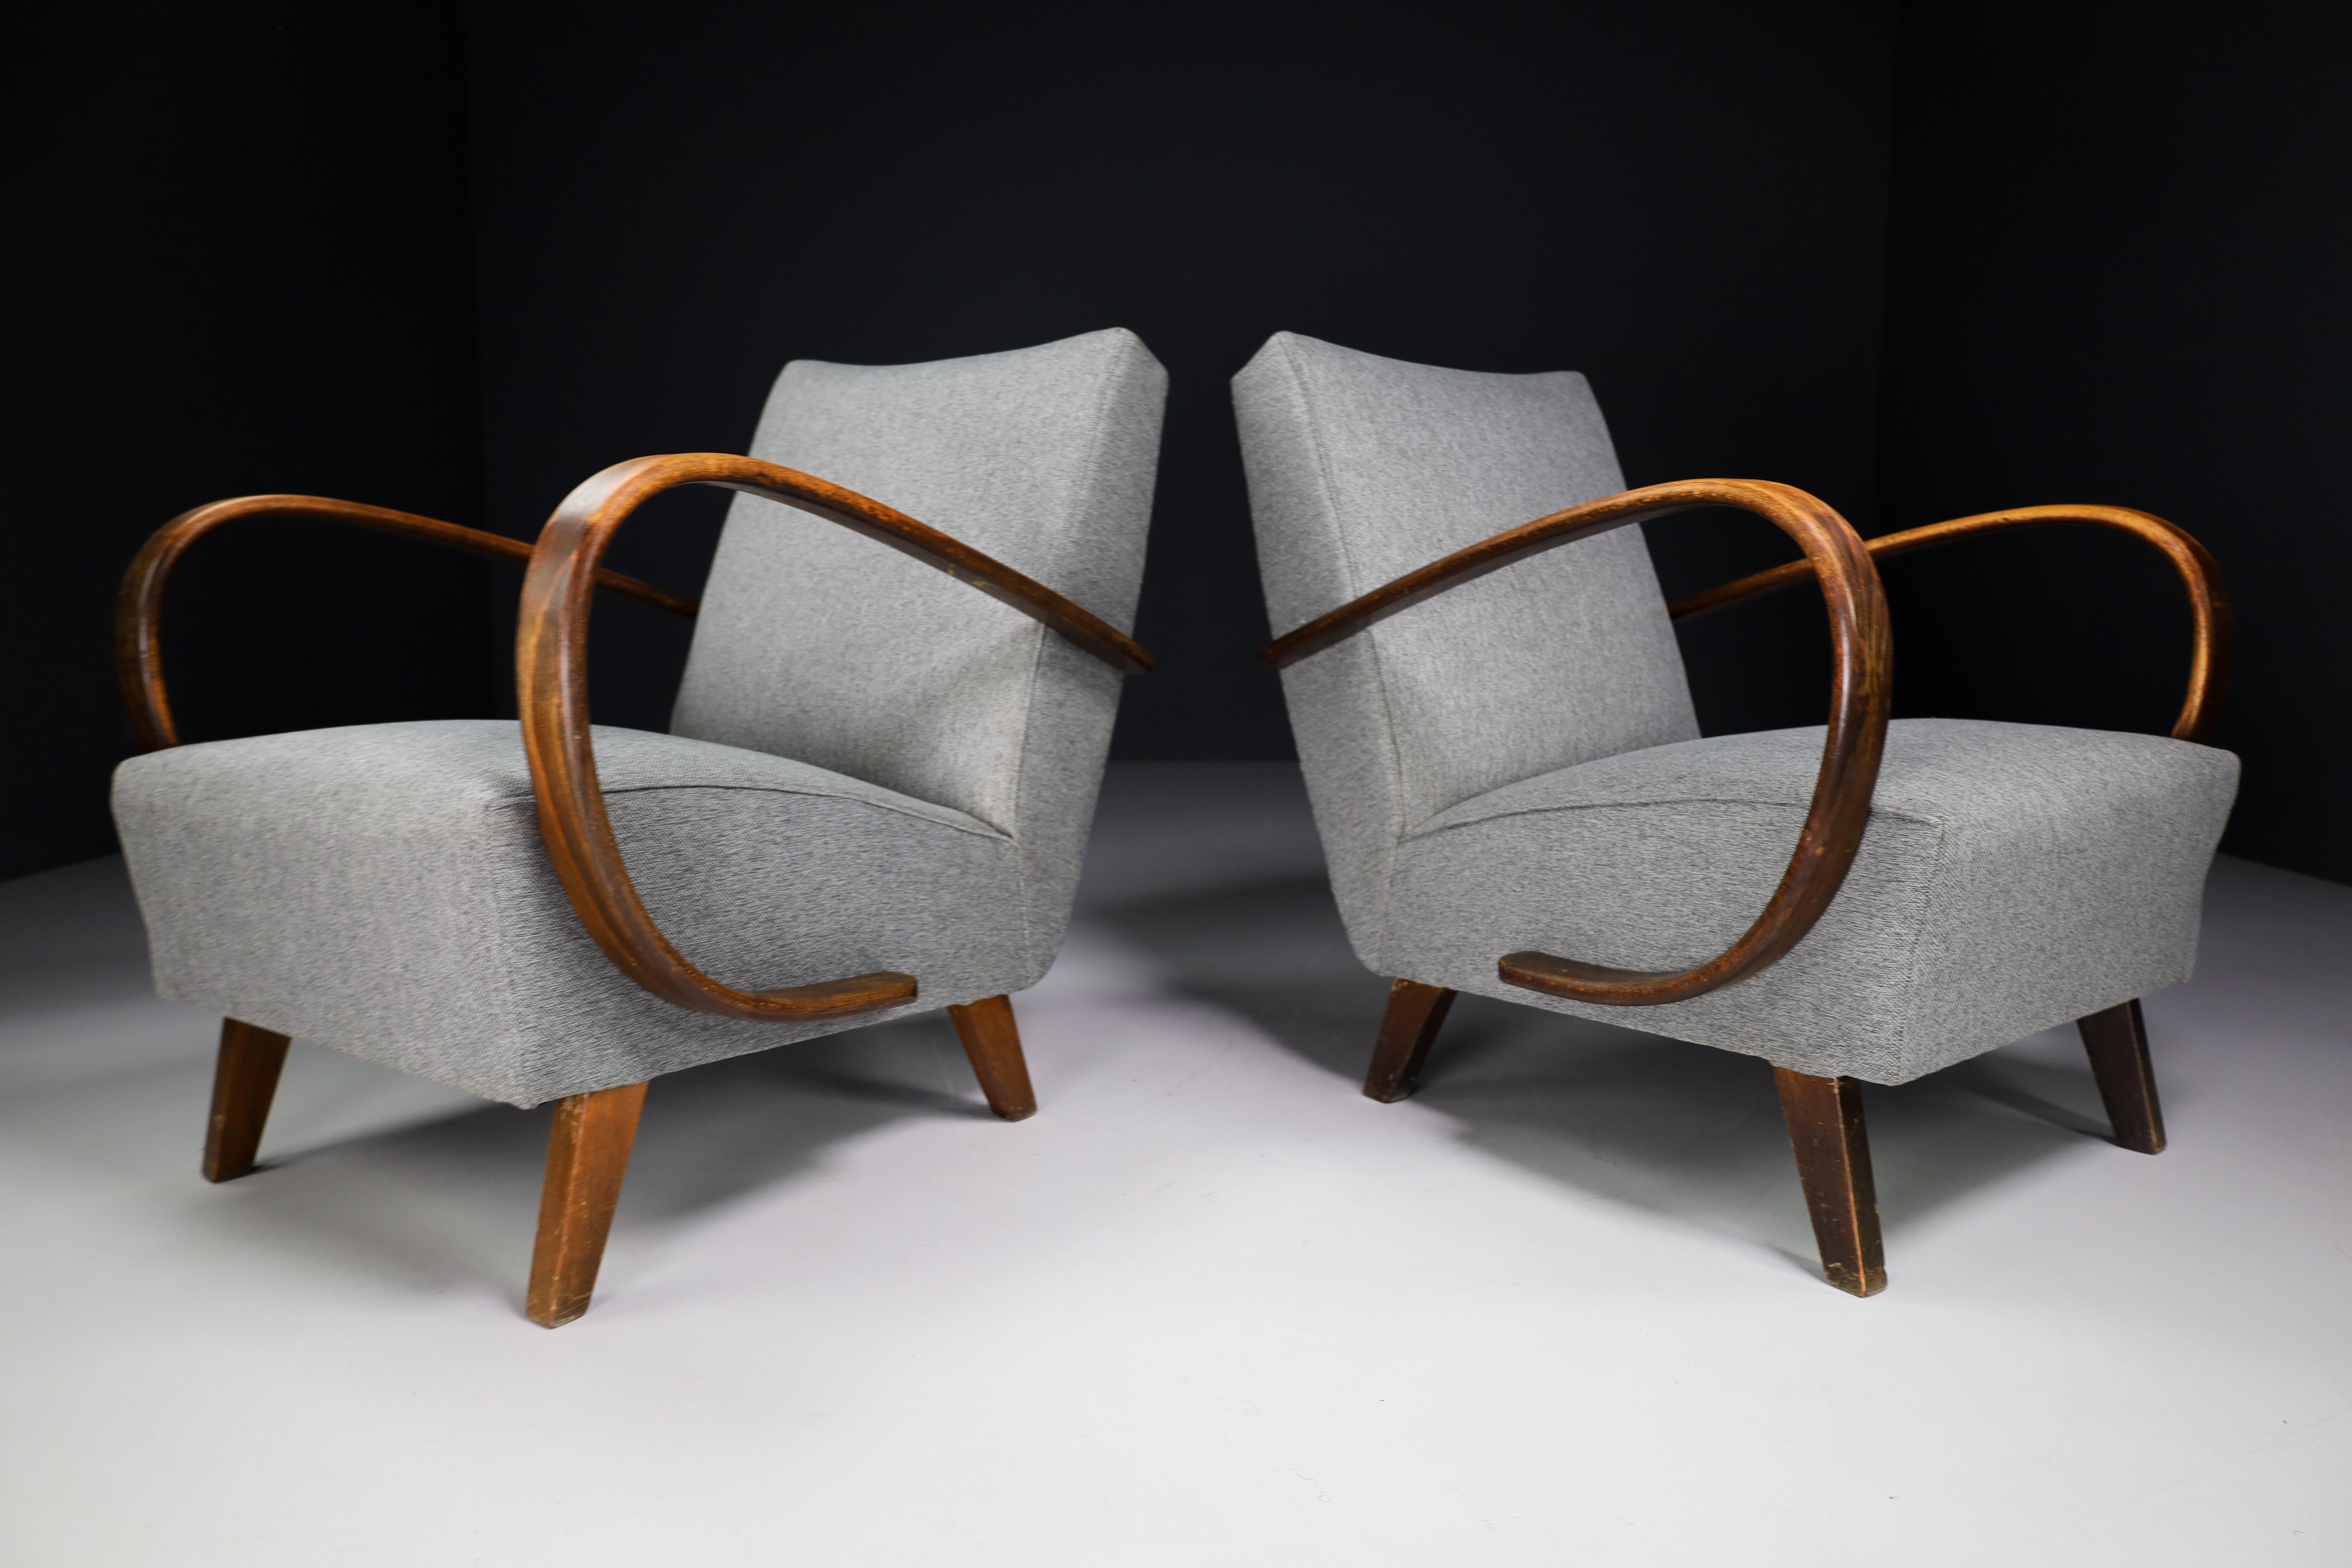 Jindrich Halabala re-upholstered patinated bentwood armchairs, 1940s Czech Republic.

These iconic set chairs are from Czechia, circa 1940. Produced by Thonet, these chairs (model H-227), designed by Jindrich Halabala, are a norm for midcentury